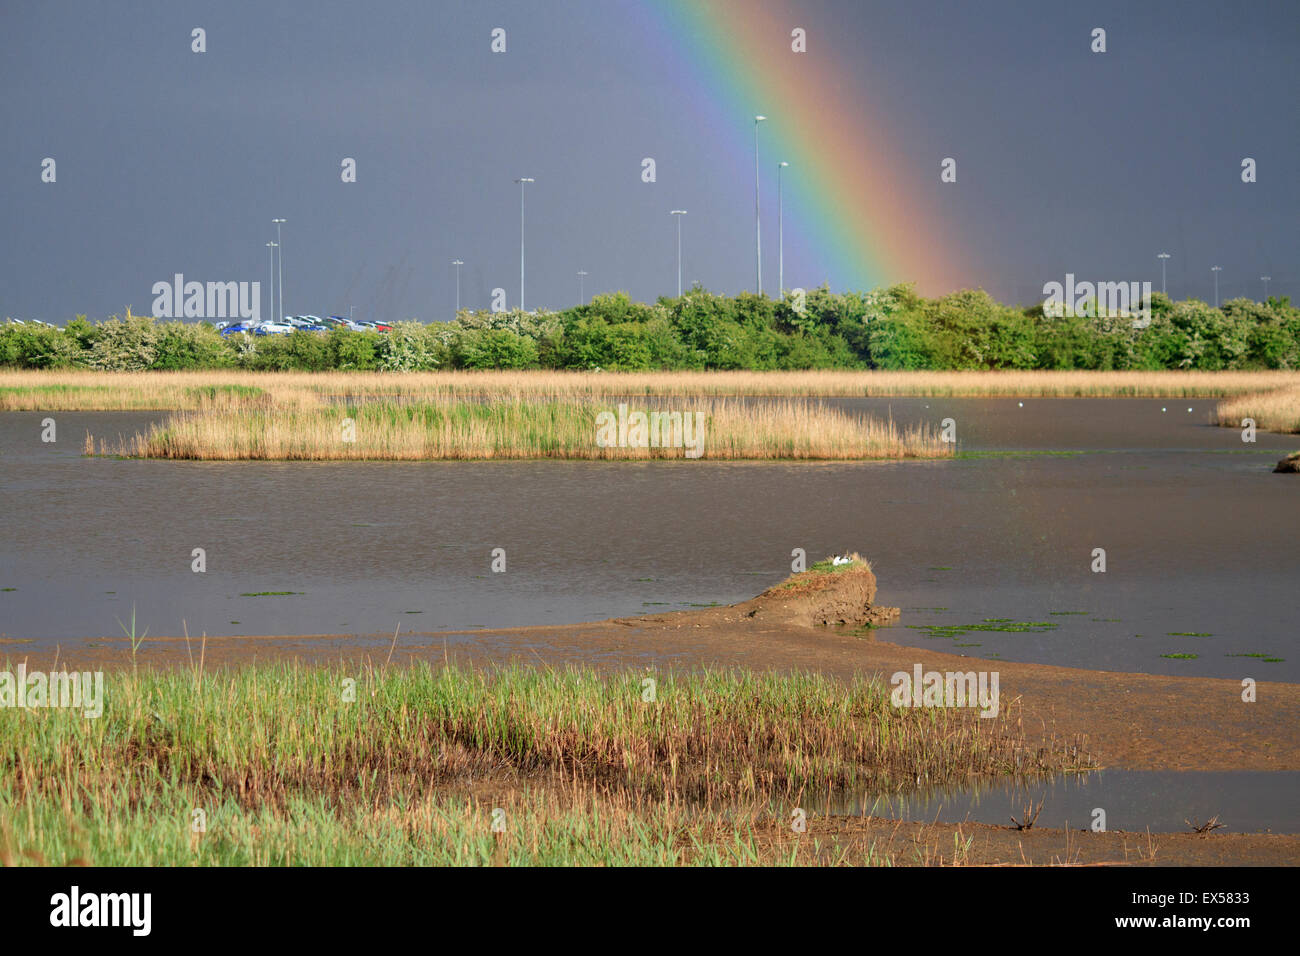 Rainbow over Immingham Biodiesel plant with Killingholme pits nature reserve in the foreground. Stock Photo